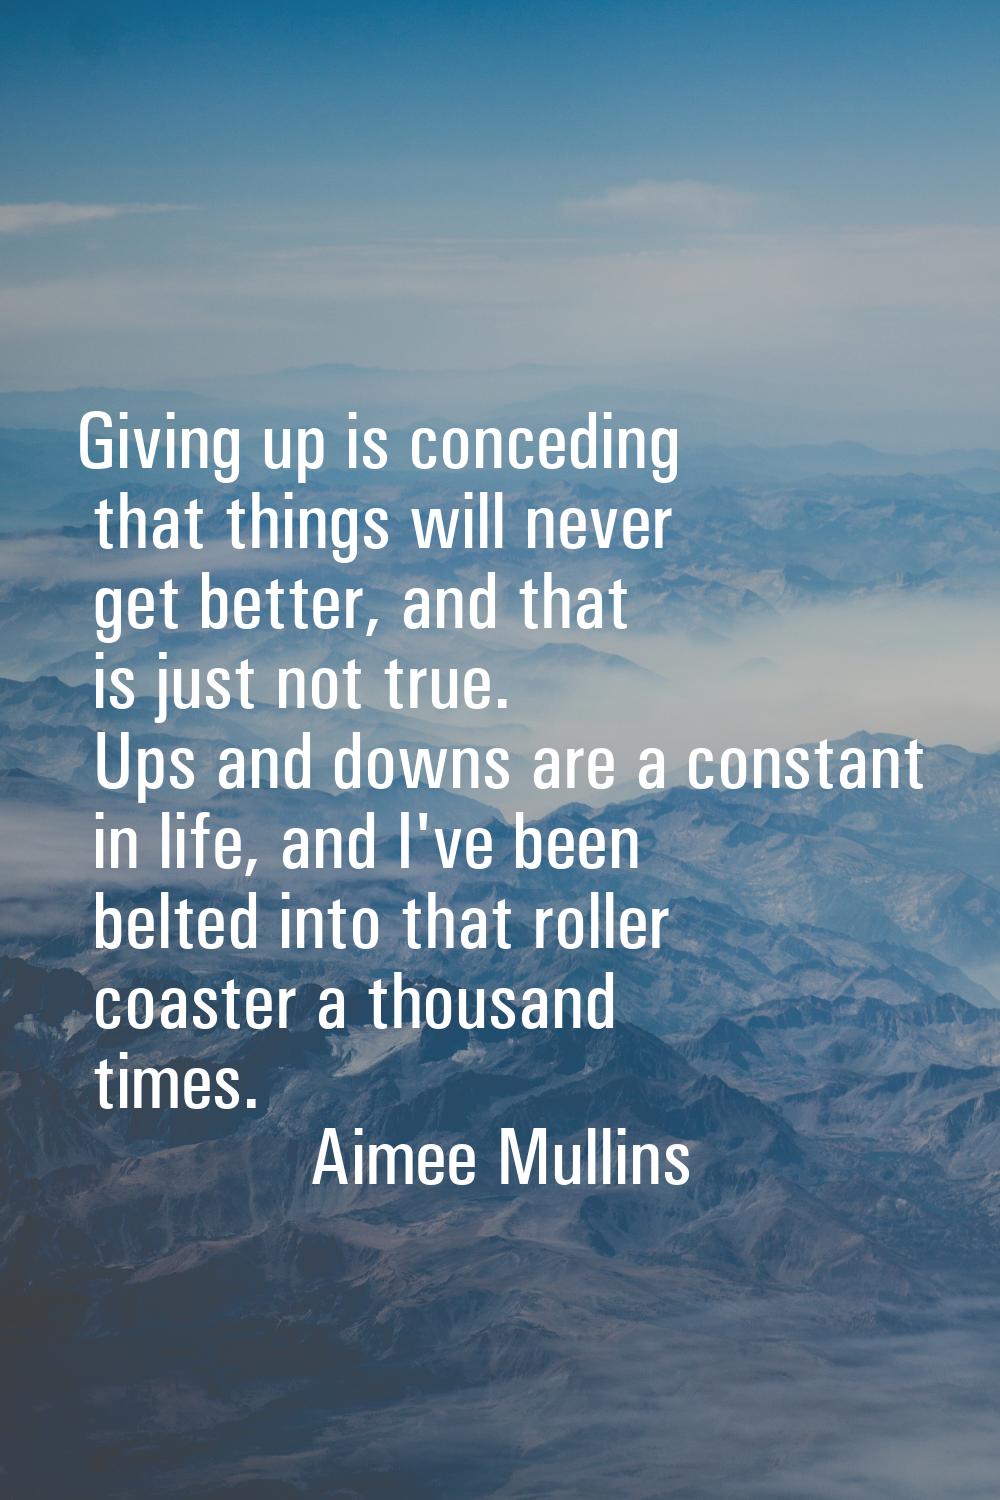 Giving up is conceding that things will never get better, and that is just not true. Ups and downs 